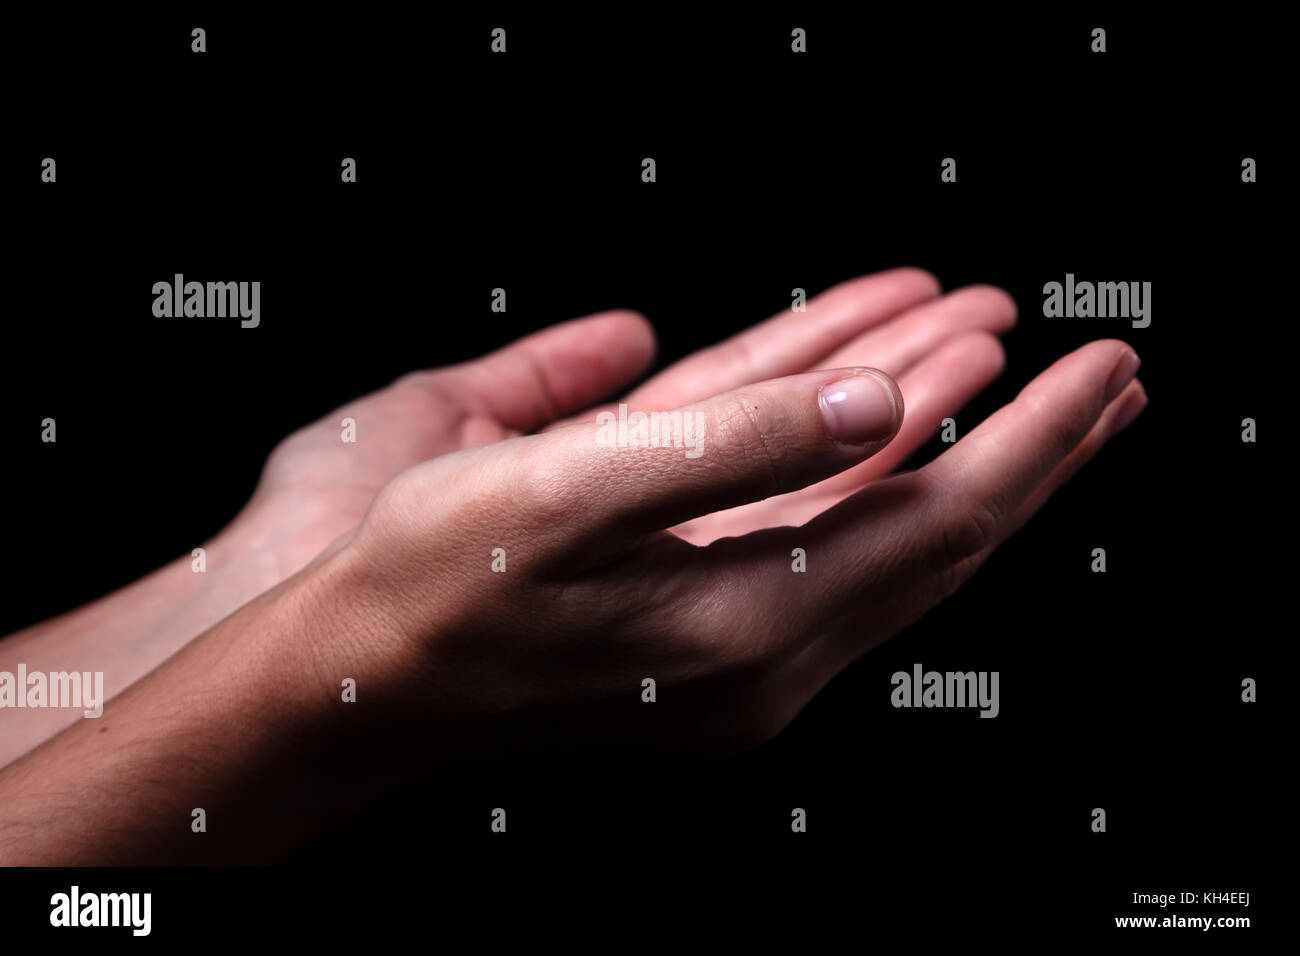 Female hands praying with palms up arms outstretched. Black background. Close up of woman hand. Concept for prayer faith religion religious worship Stock Photo